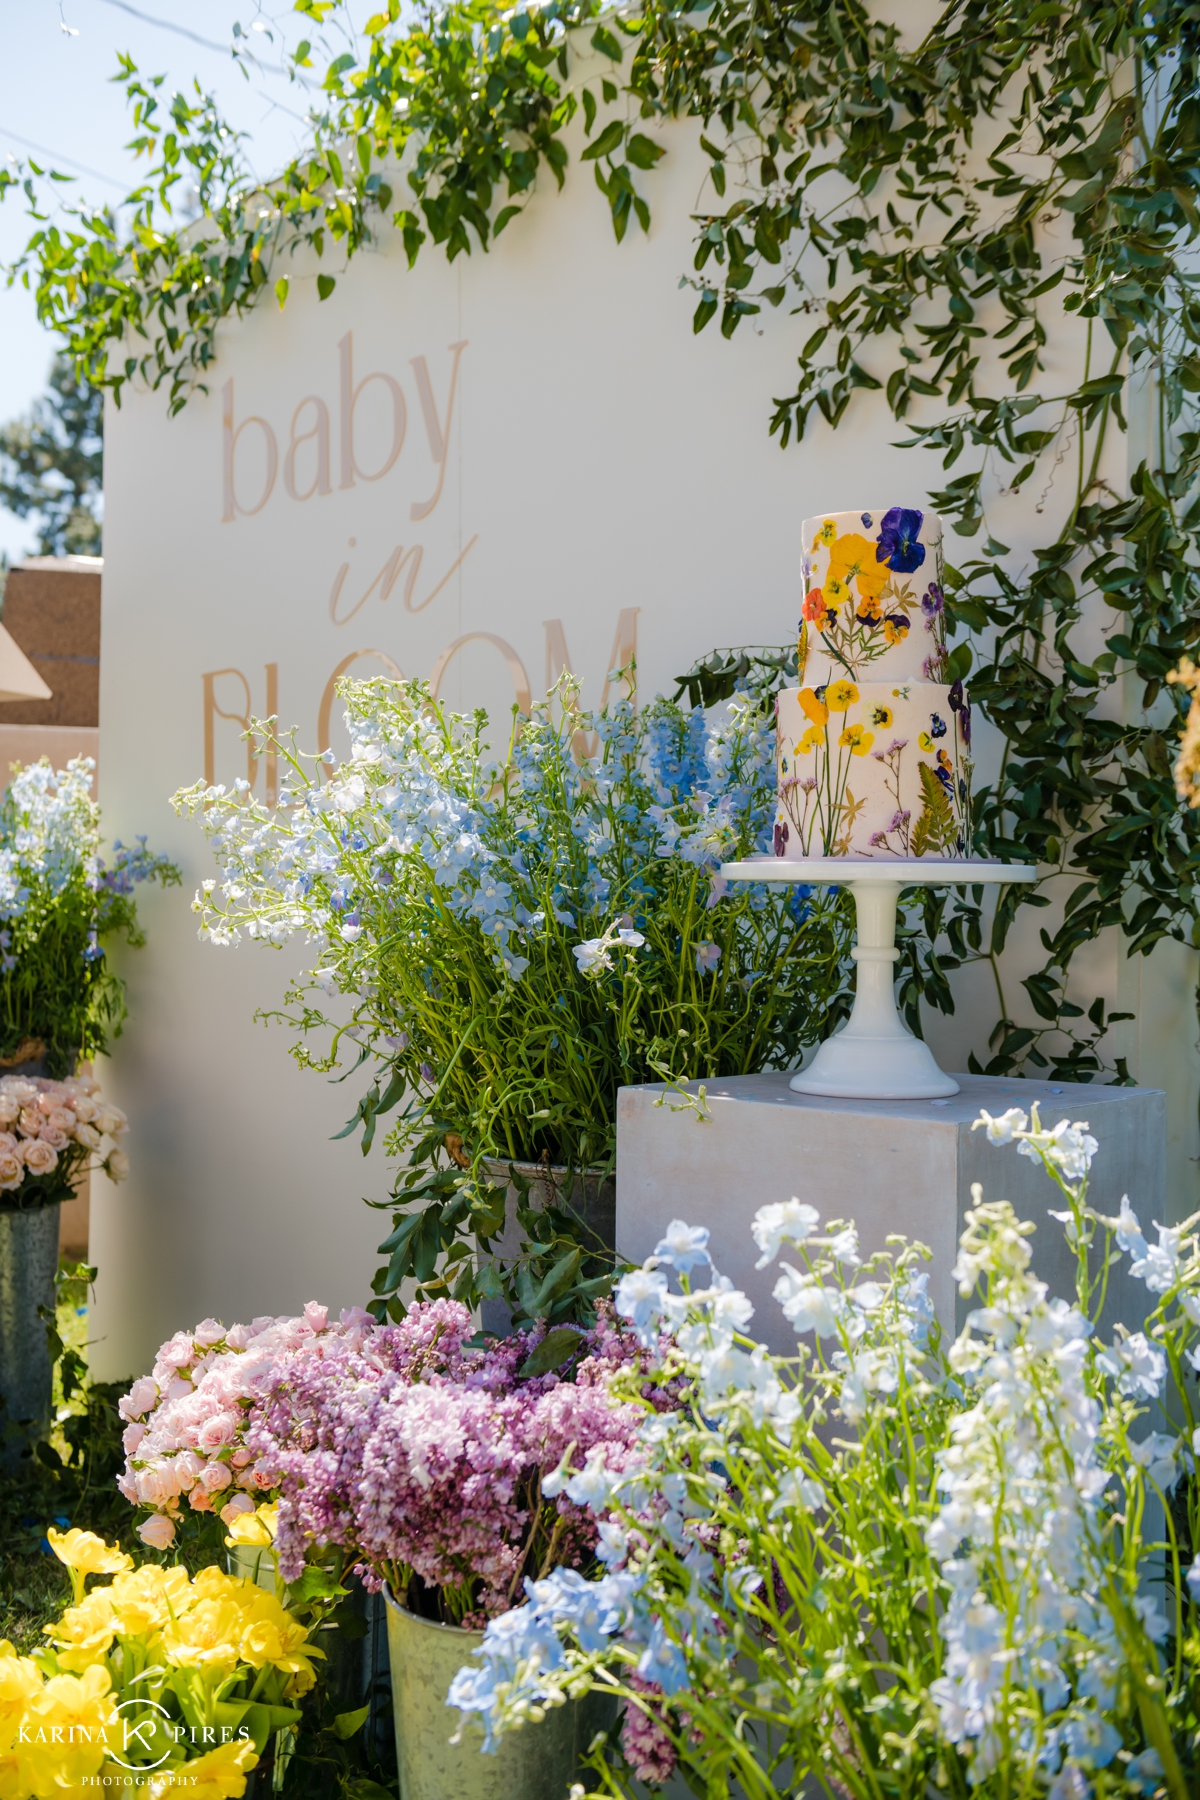 Garden-inspired backyard baby shower and gender reveal party in SoCal